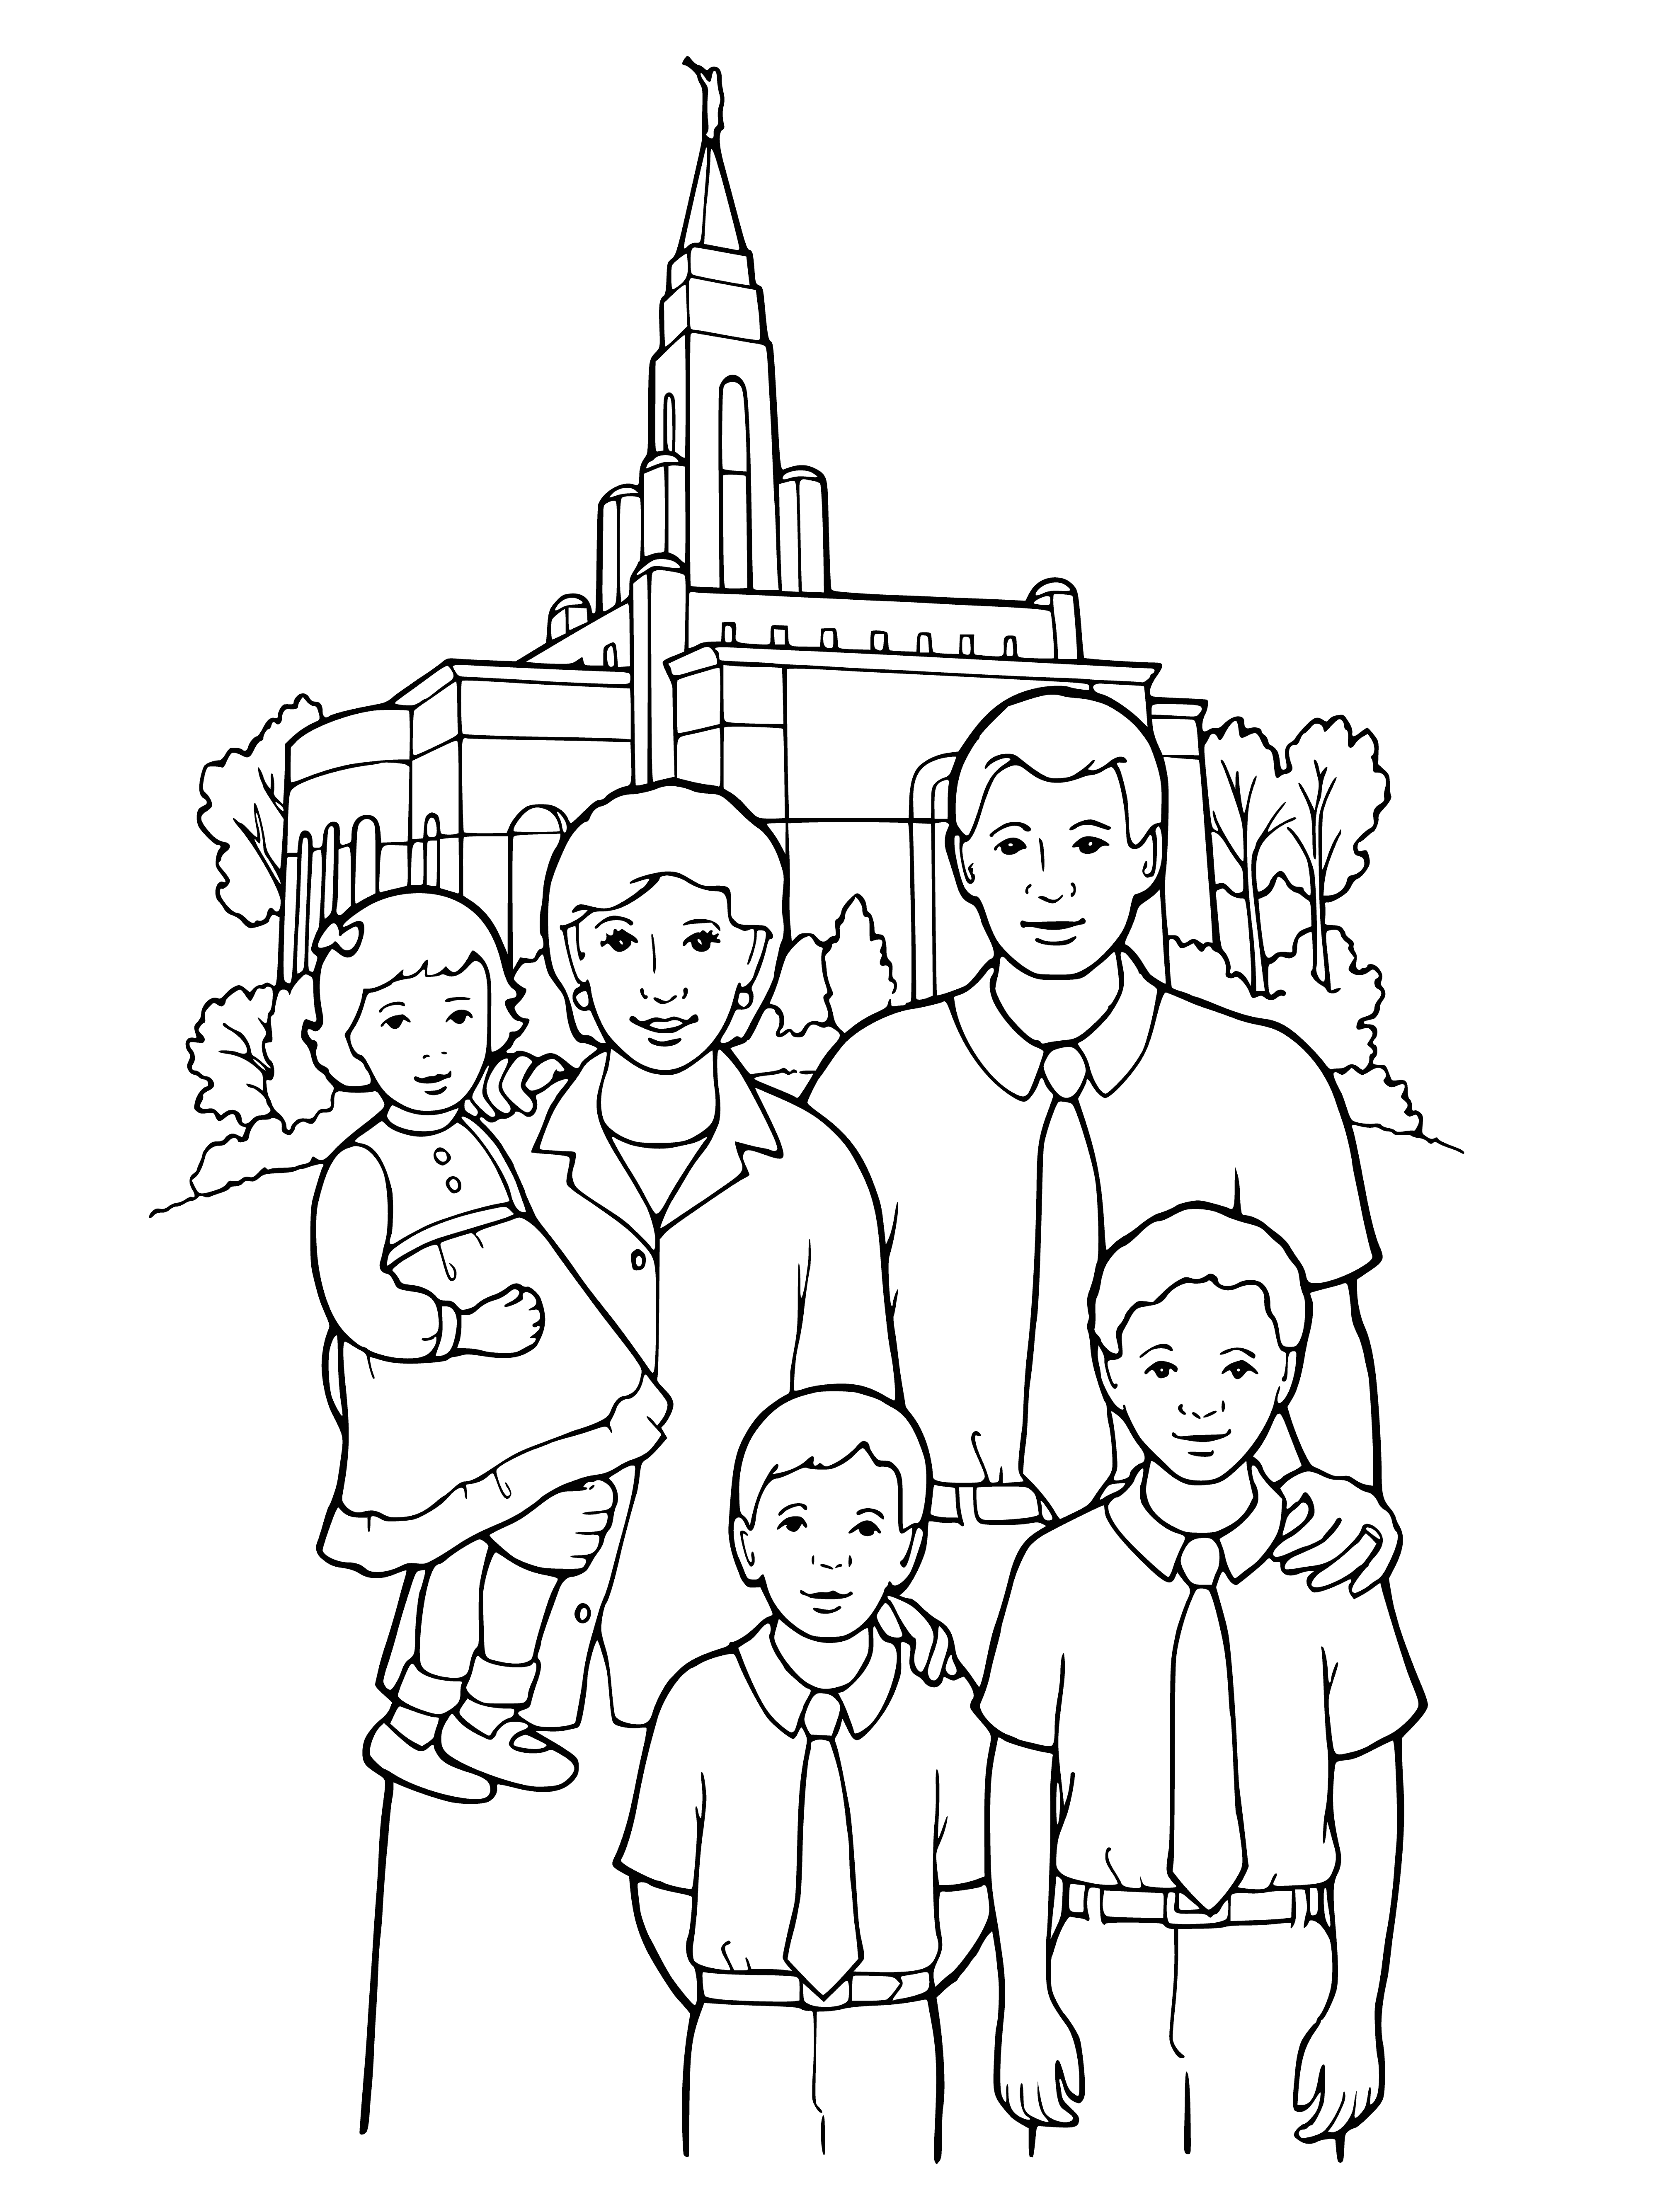 coloring page: Family of five surrounded by a park w/ trees & playground, parents smiling & kids laughing.